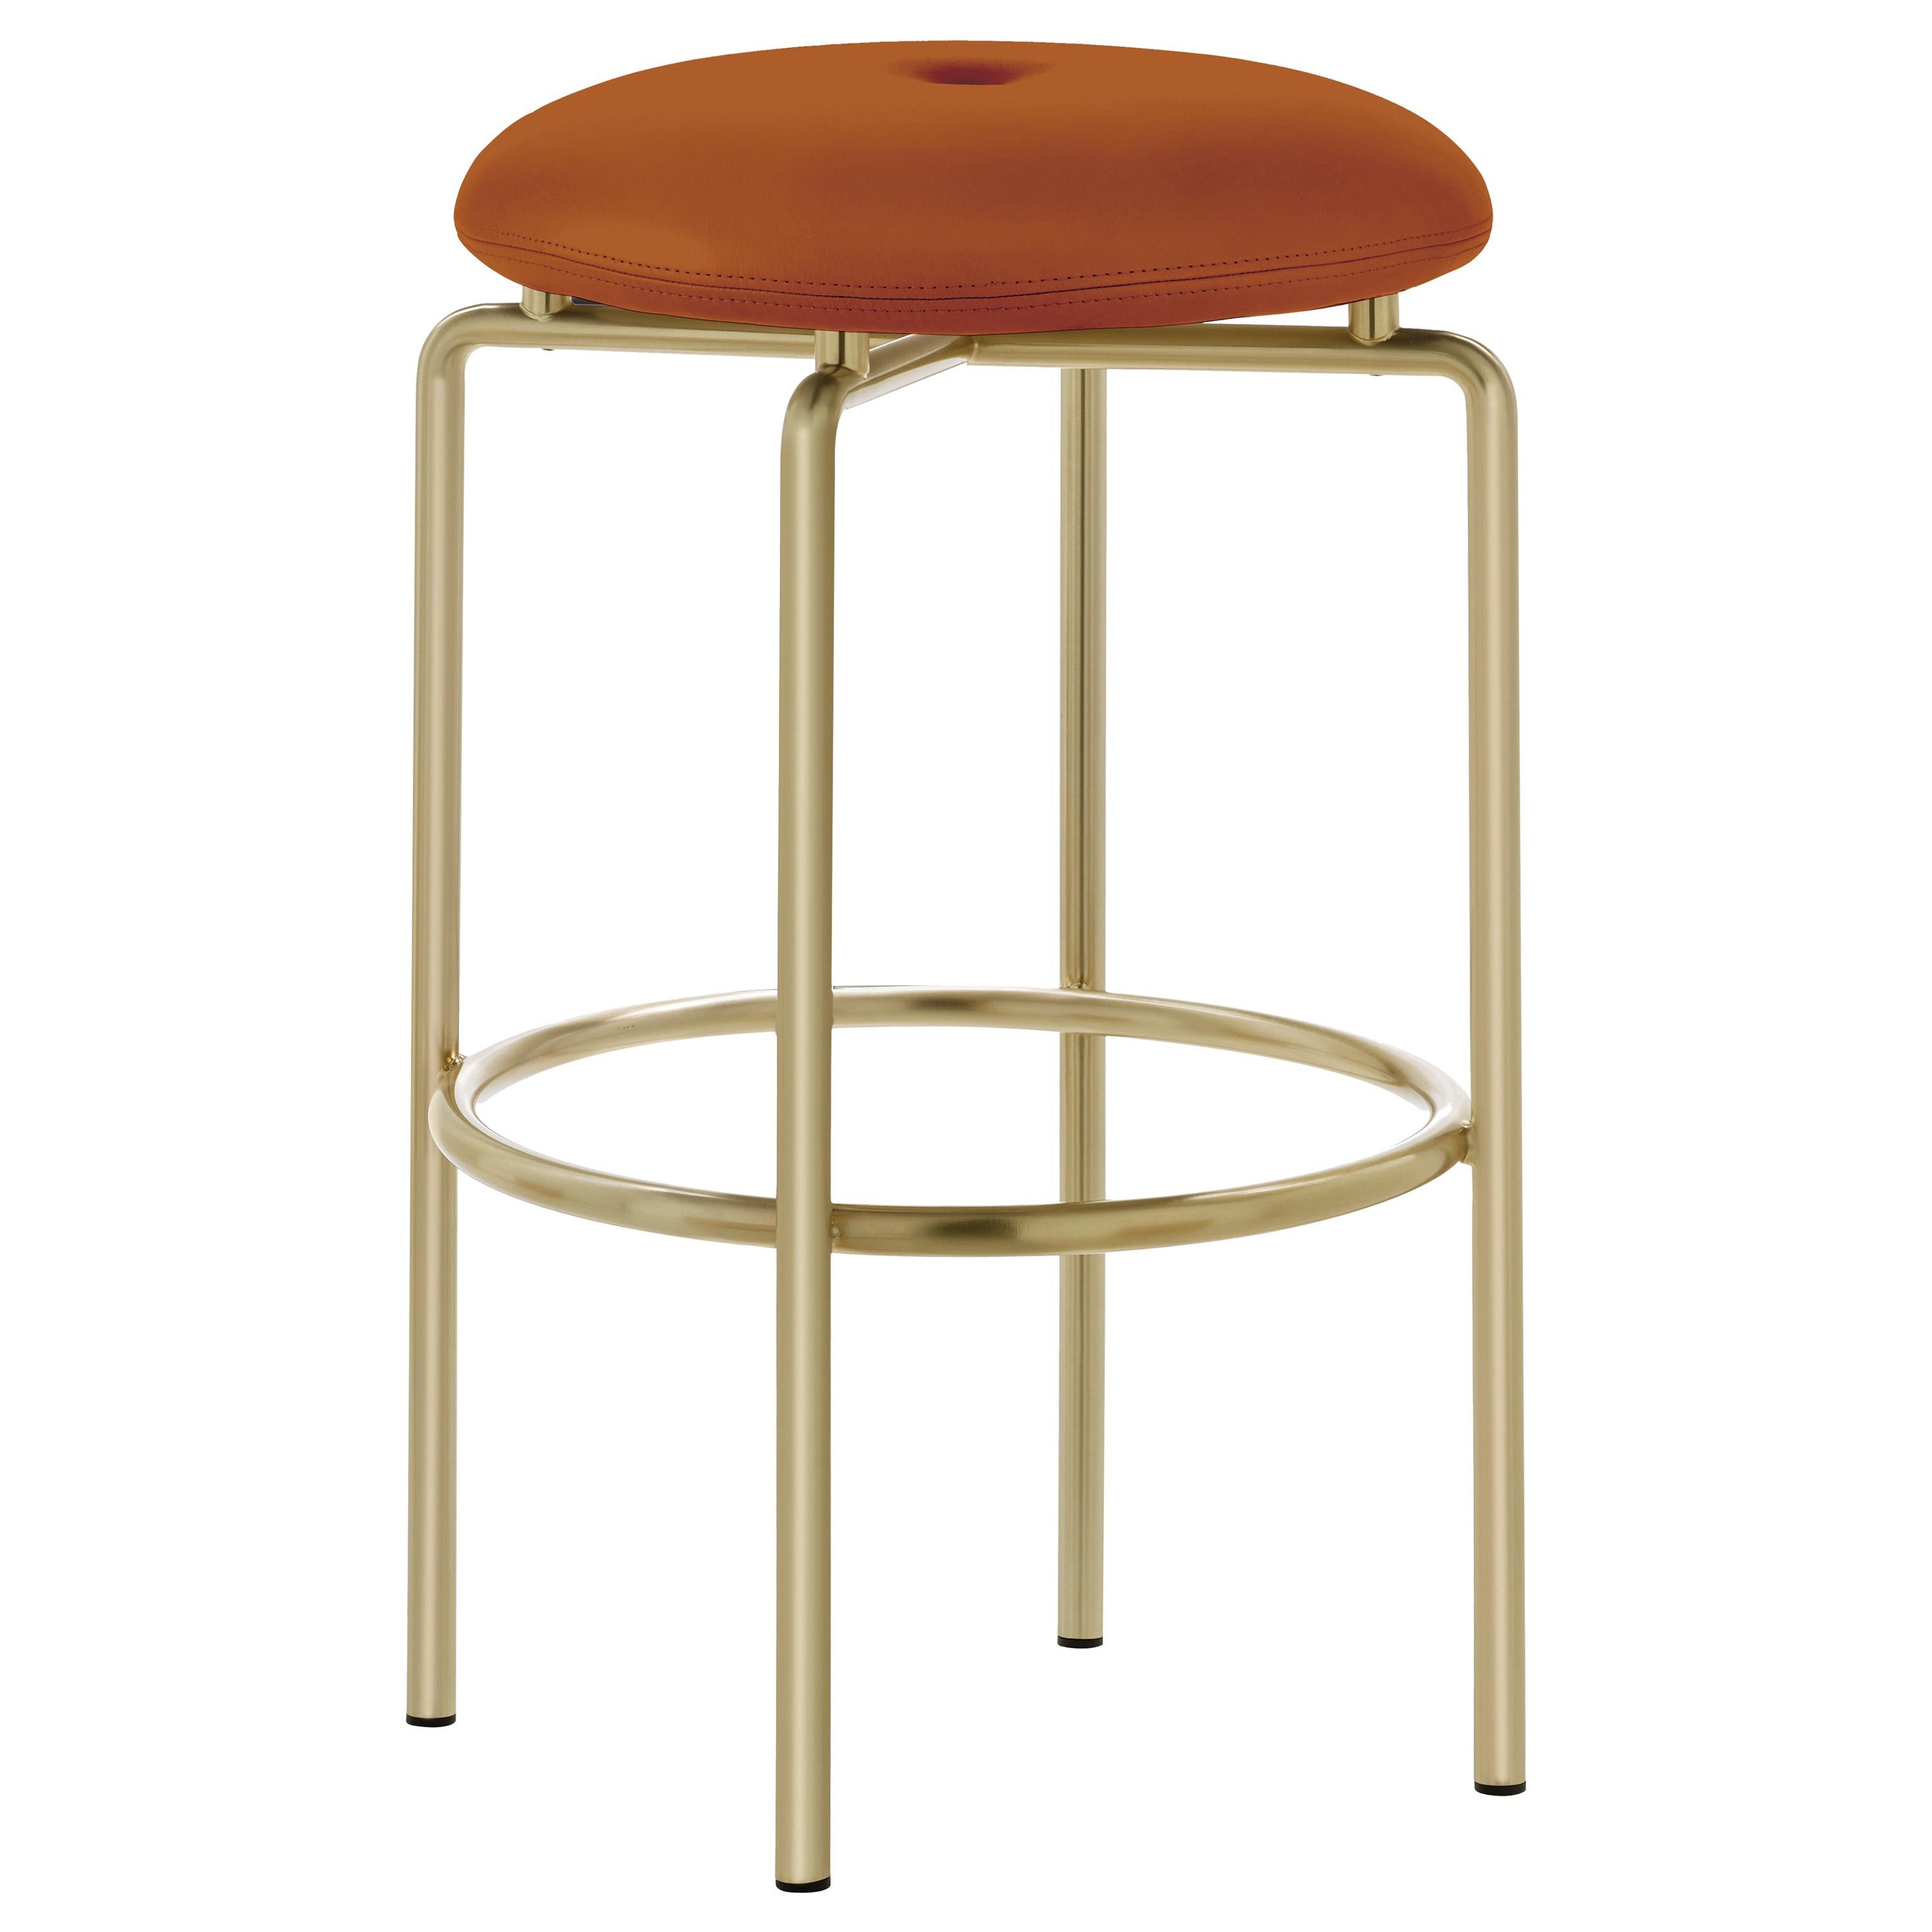 Circular Counter Stool in Satin Brass and Leather Designed by Craig Bassam